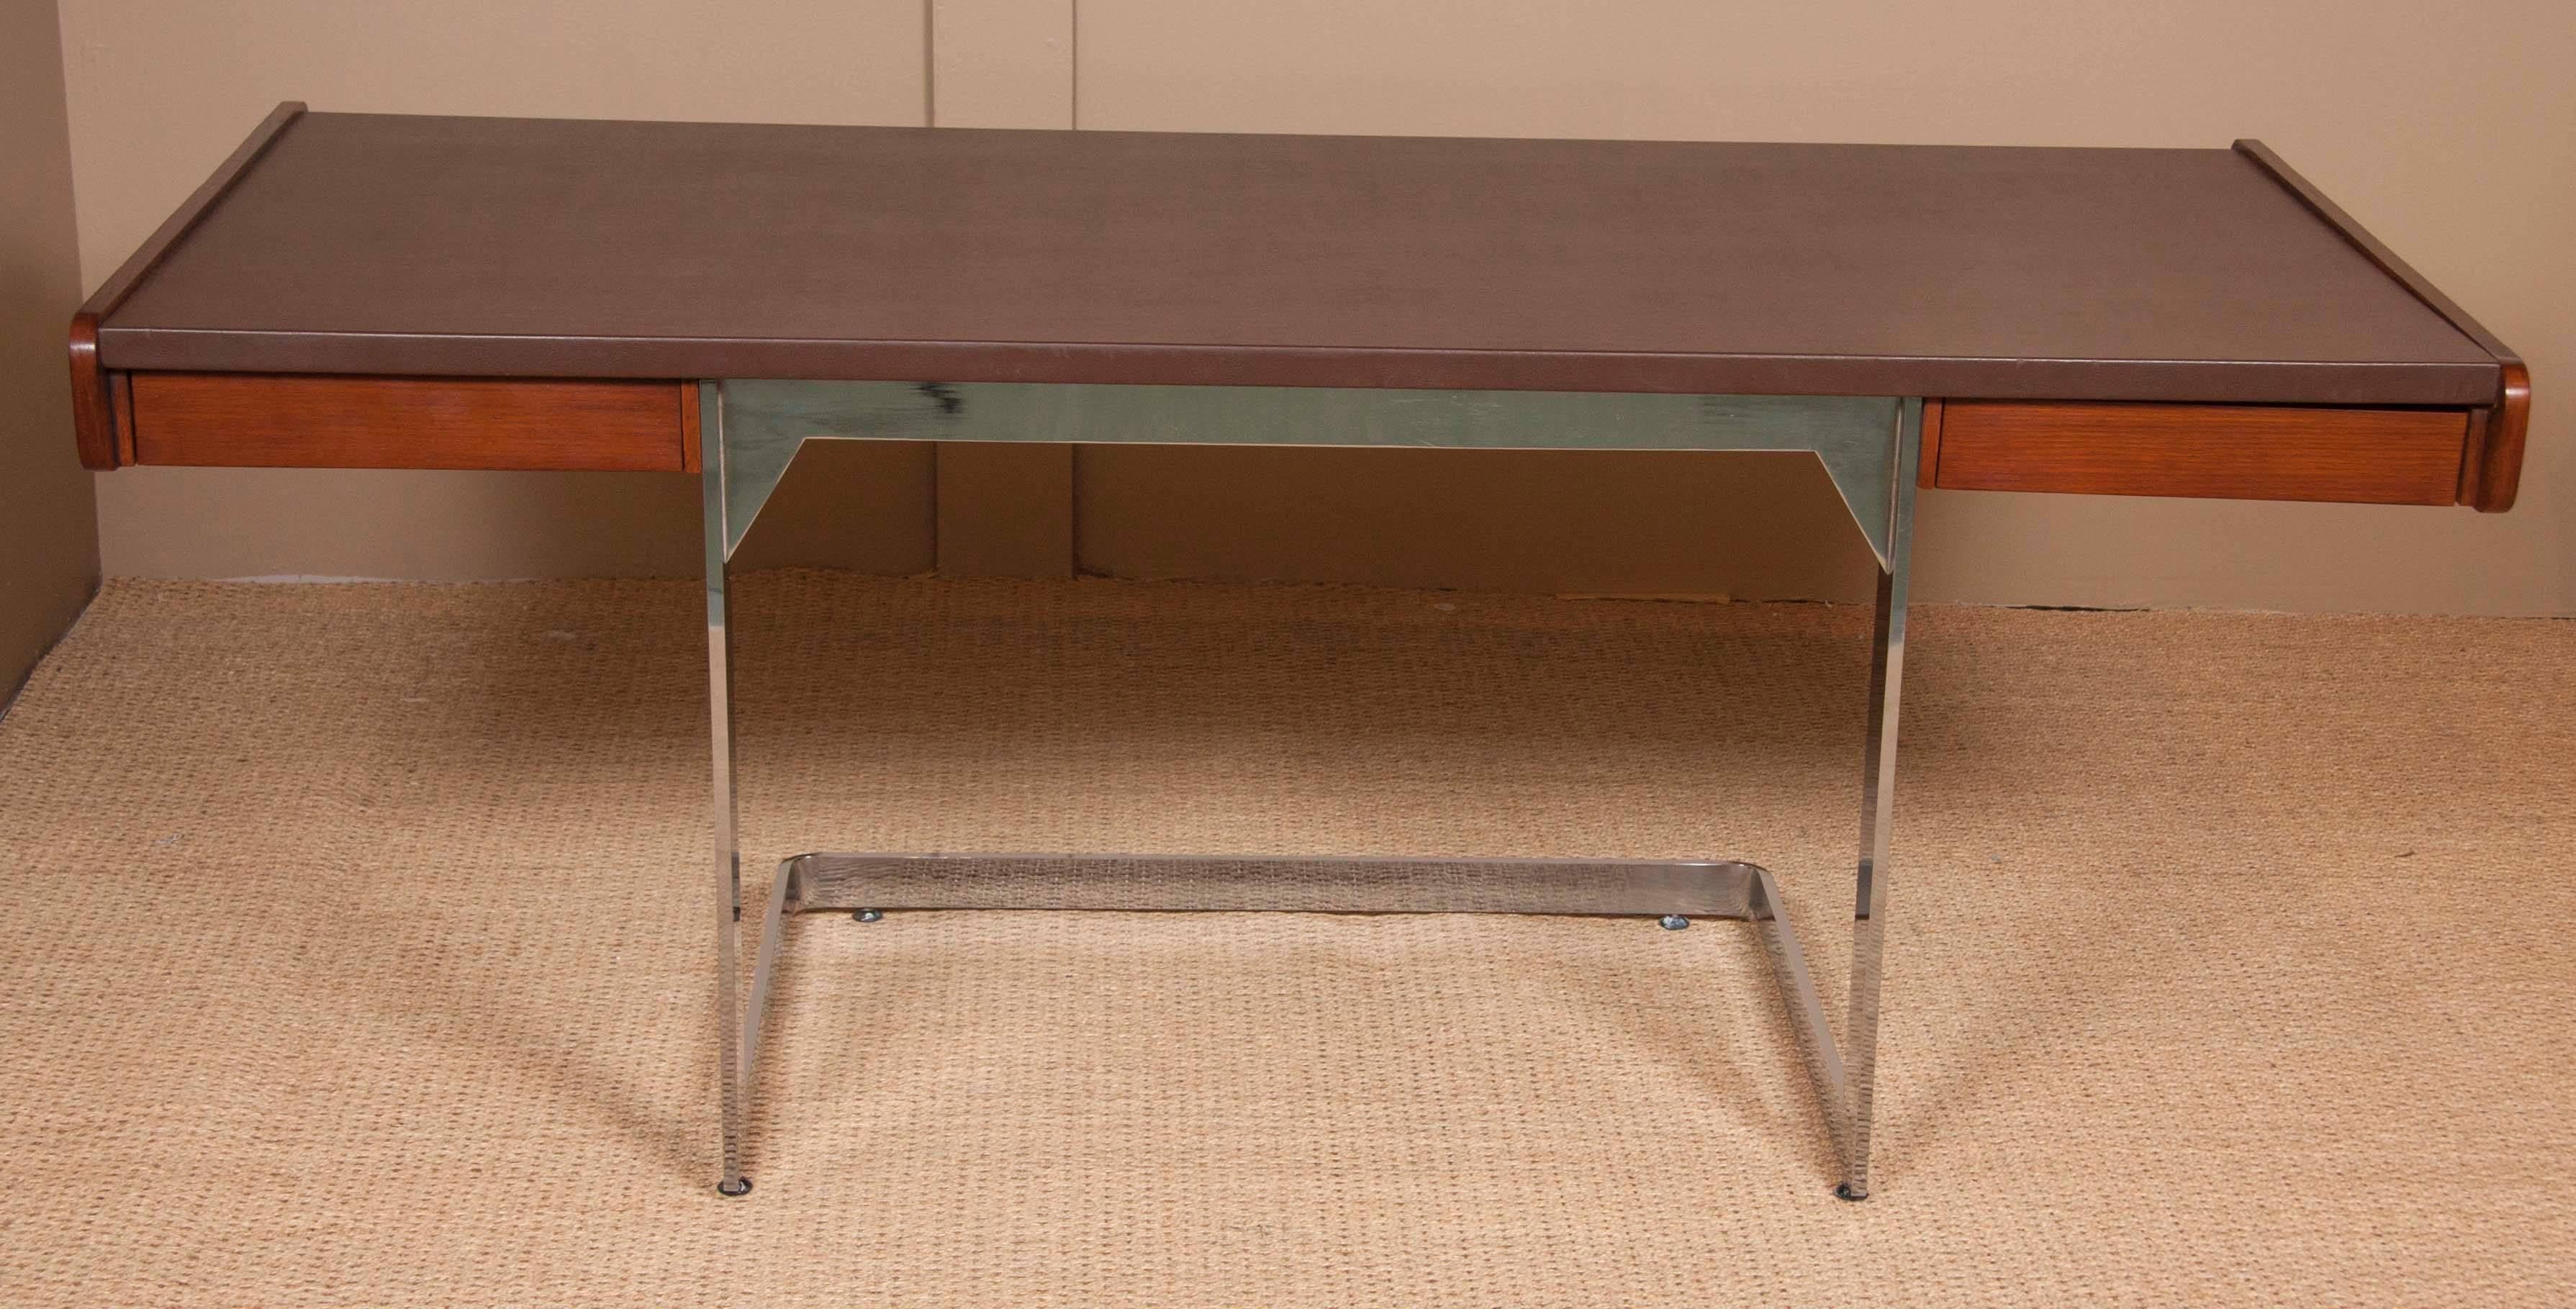 Midcentury oak and chrome leather top desk by Andre Laurent of Ste. Marie & Laurent, Inc., Canada.